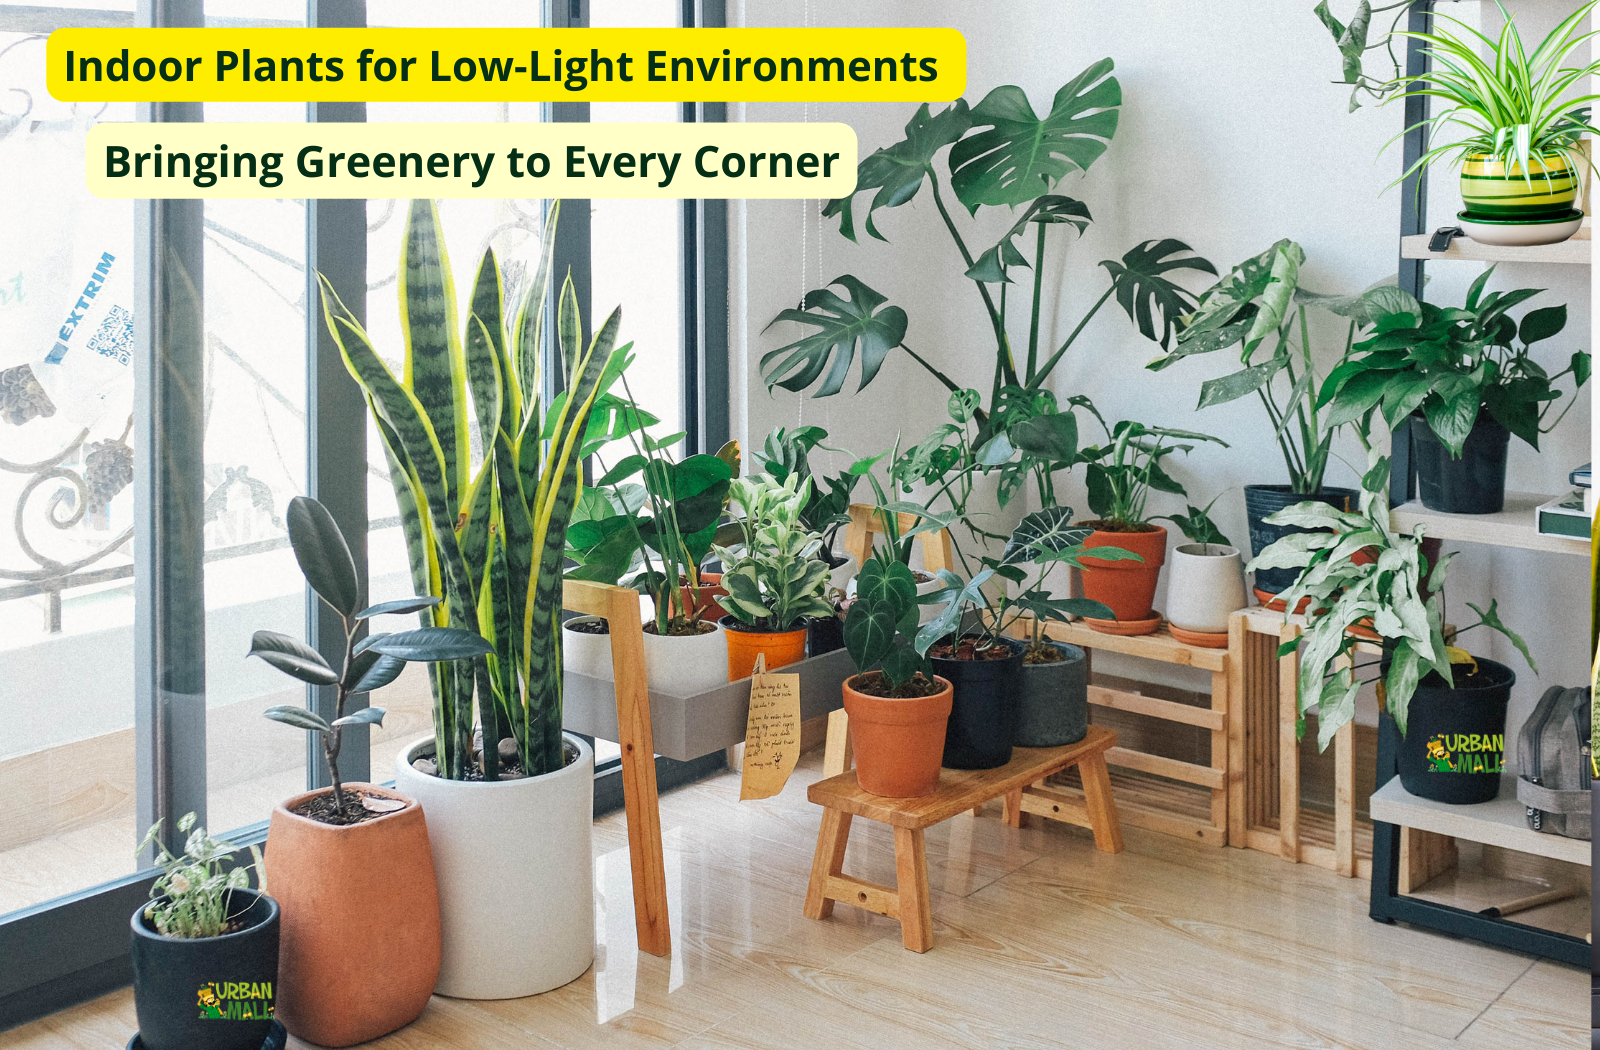 Indoor Plants for Low-Light Environments: Bringing Greenery to Every Corner